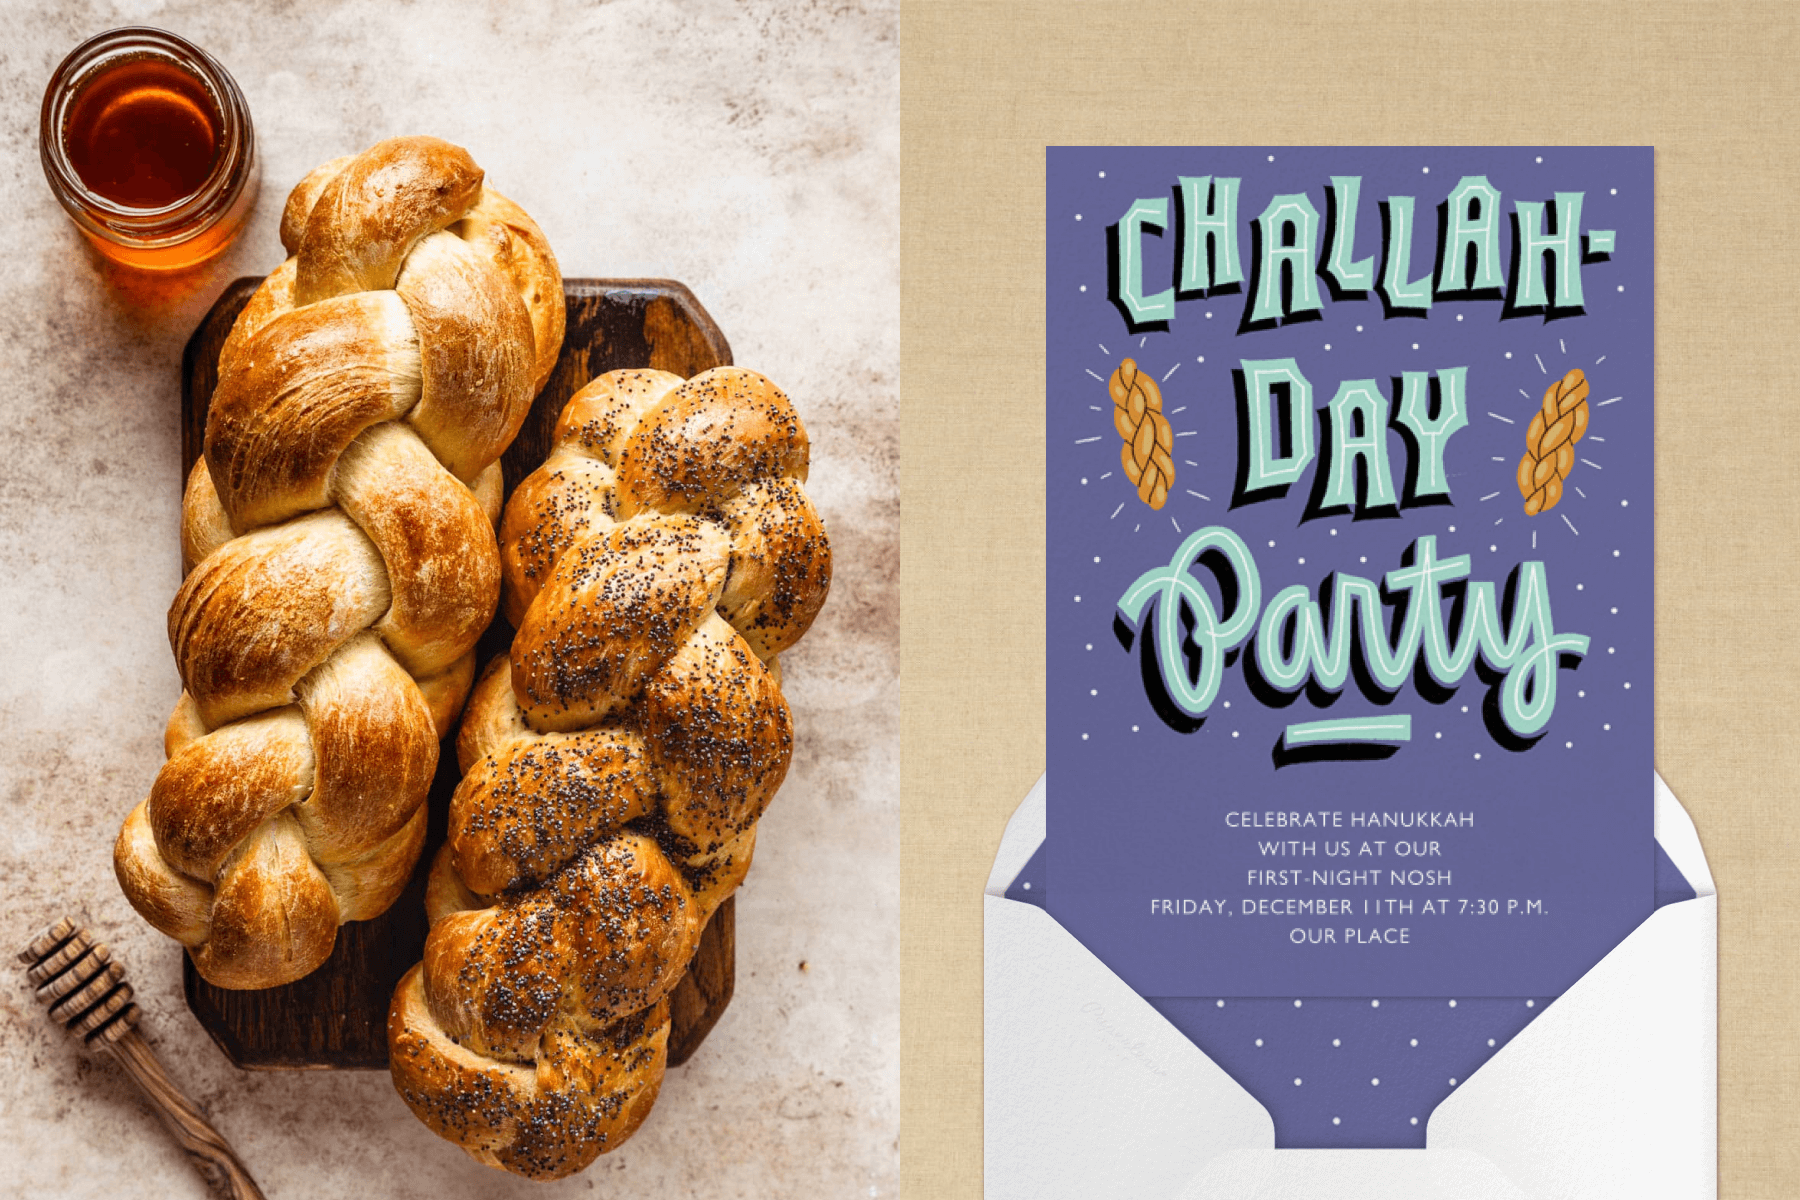 Left: Two challah loaves surrounded by honey, right: a Hanukkah party invitation with illustrated text that reads “Challa-day Party.”